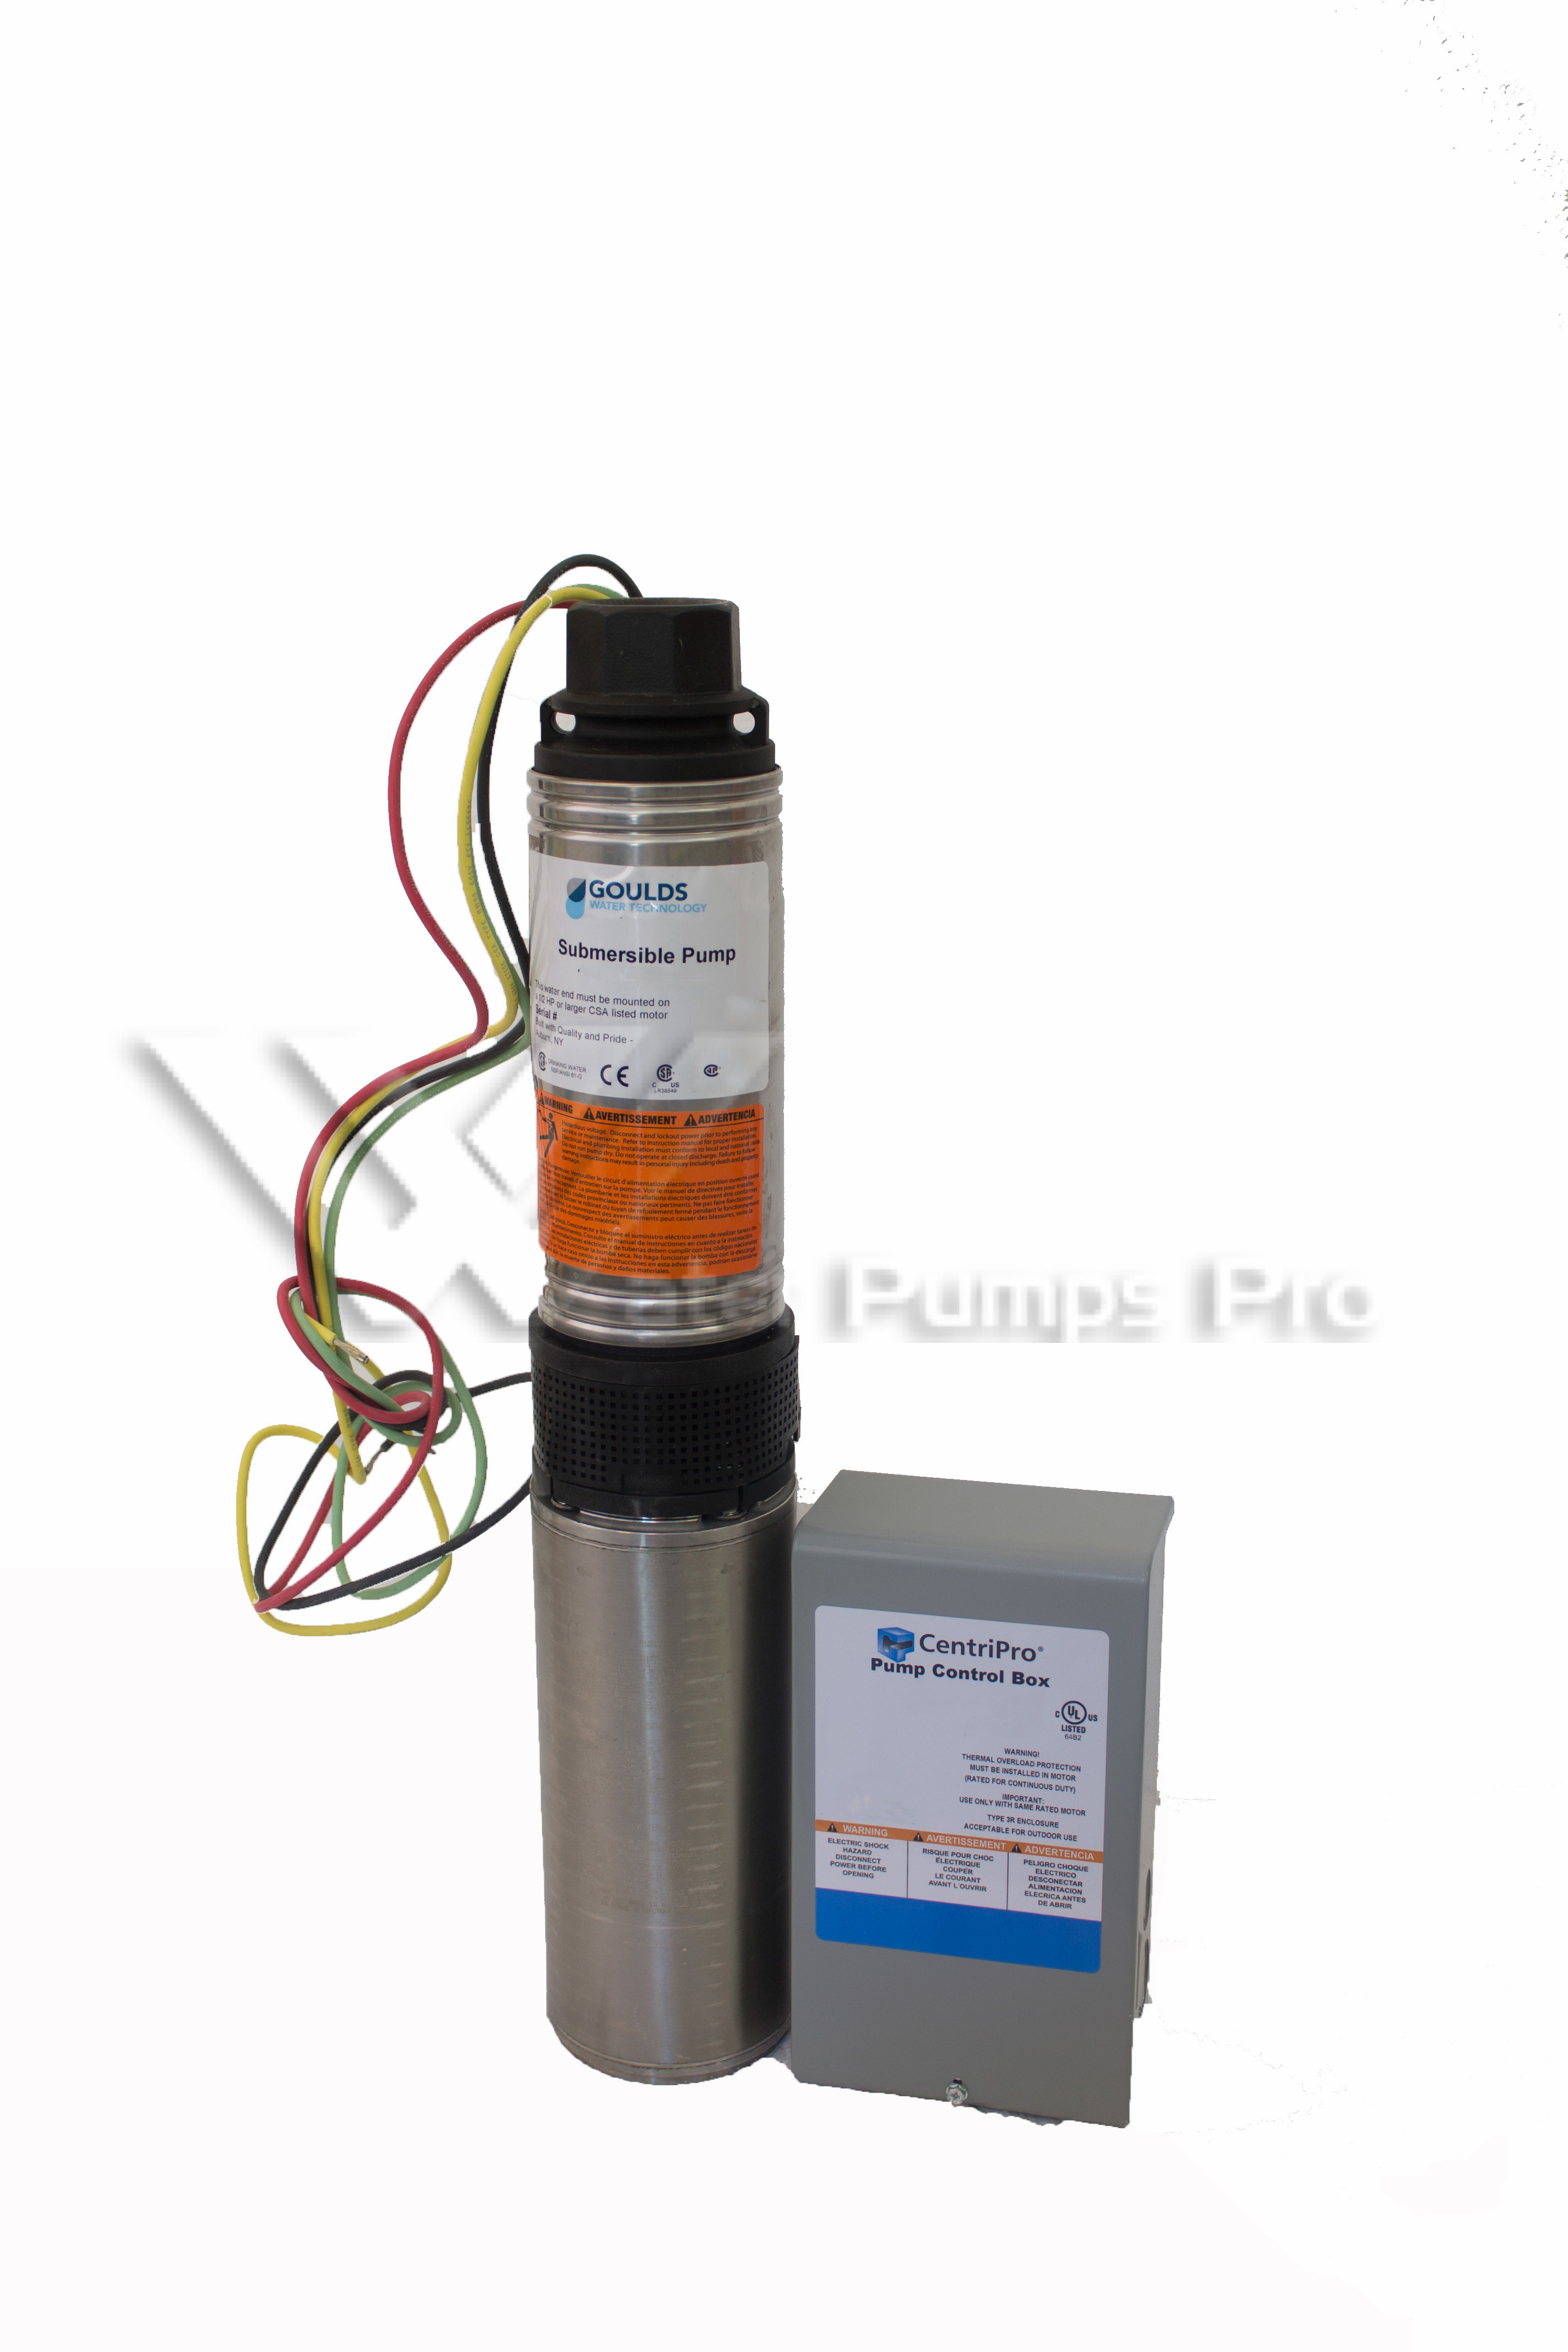 Goulds 10HS05412C Submersible Water Well Pump 1/2HP 230V 3Wire